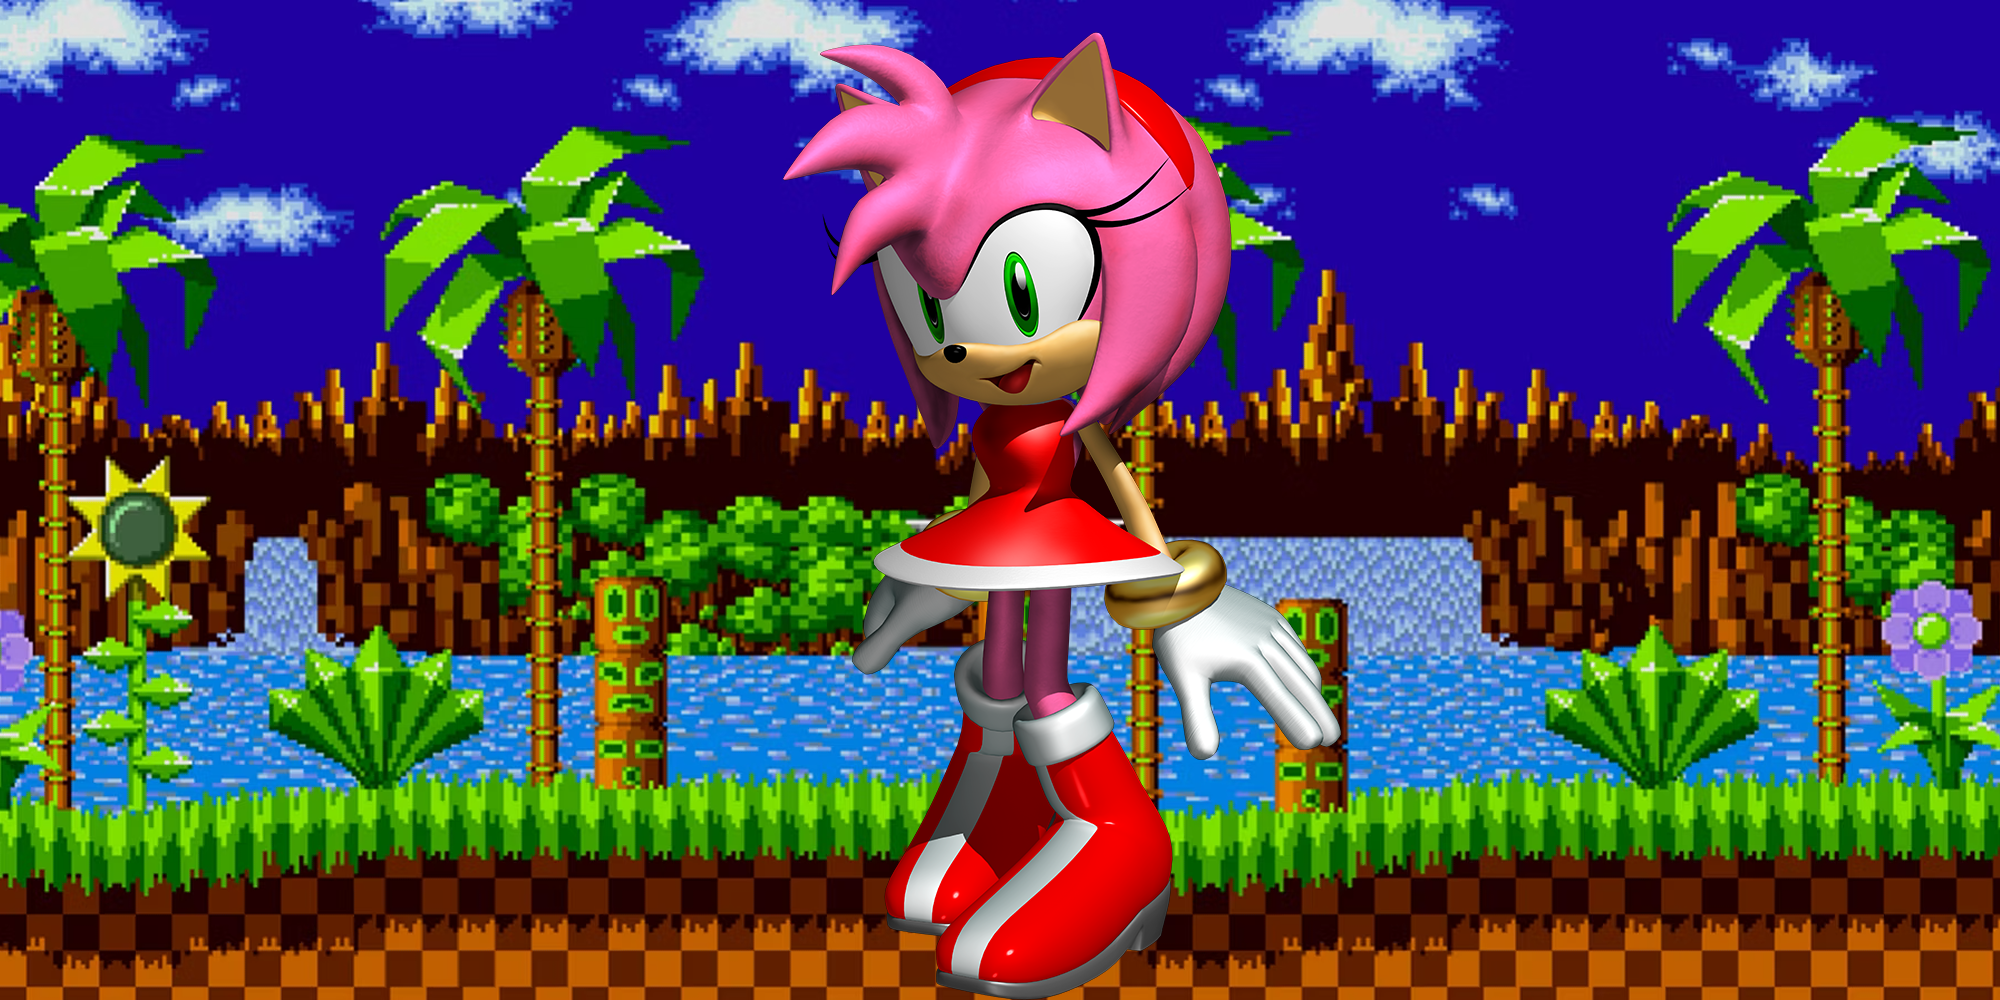 Amy Rose against the backdrop of Green Hill Zone